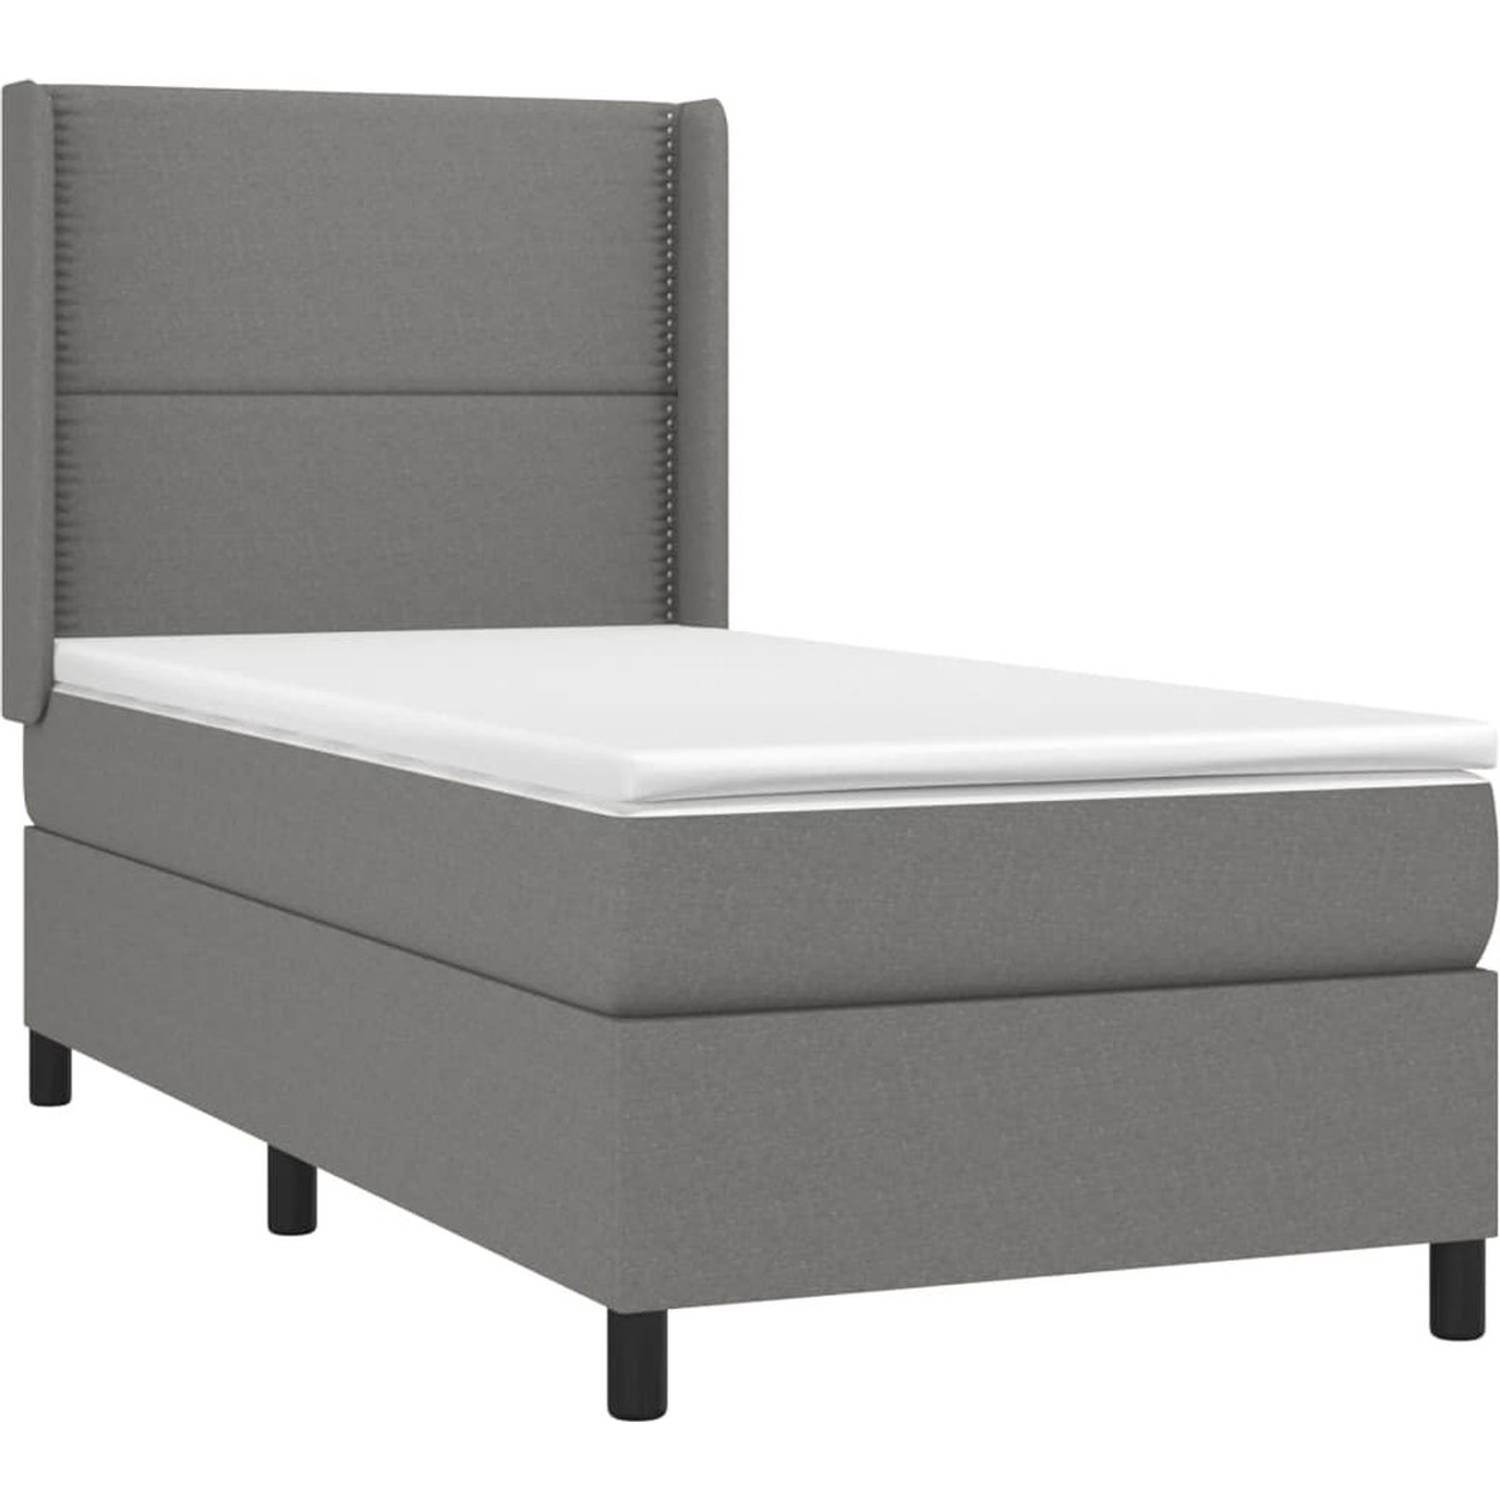 The Living Store Boxspringbed - Bed - 203x93x118/128 cm - Donkergrijs